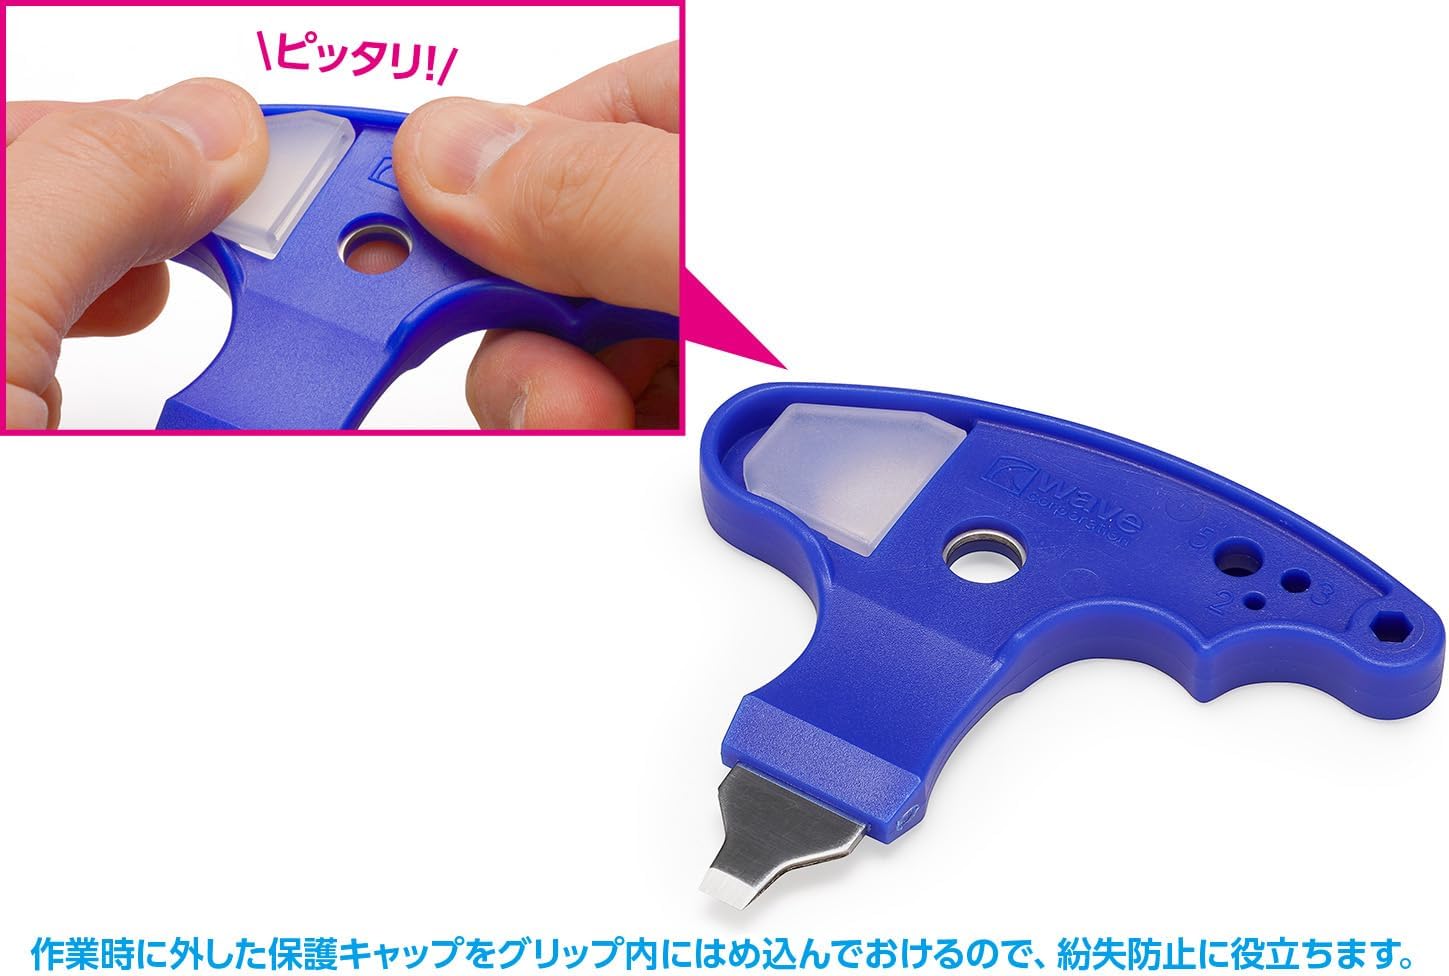 Wave HT220 Hobby Tool Series Parts Opener V2 (Blade Width: 0.2 inches (5 mm) Plastic Model Tool - BanzaiHobby